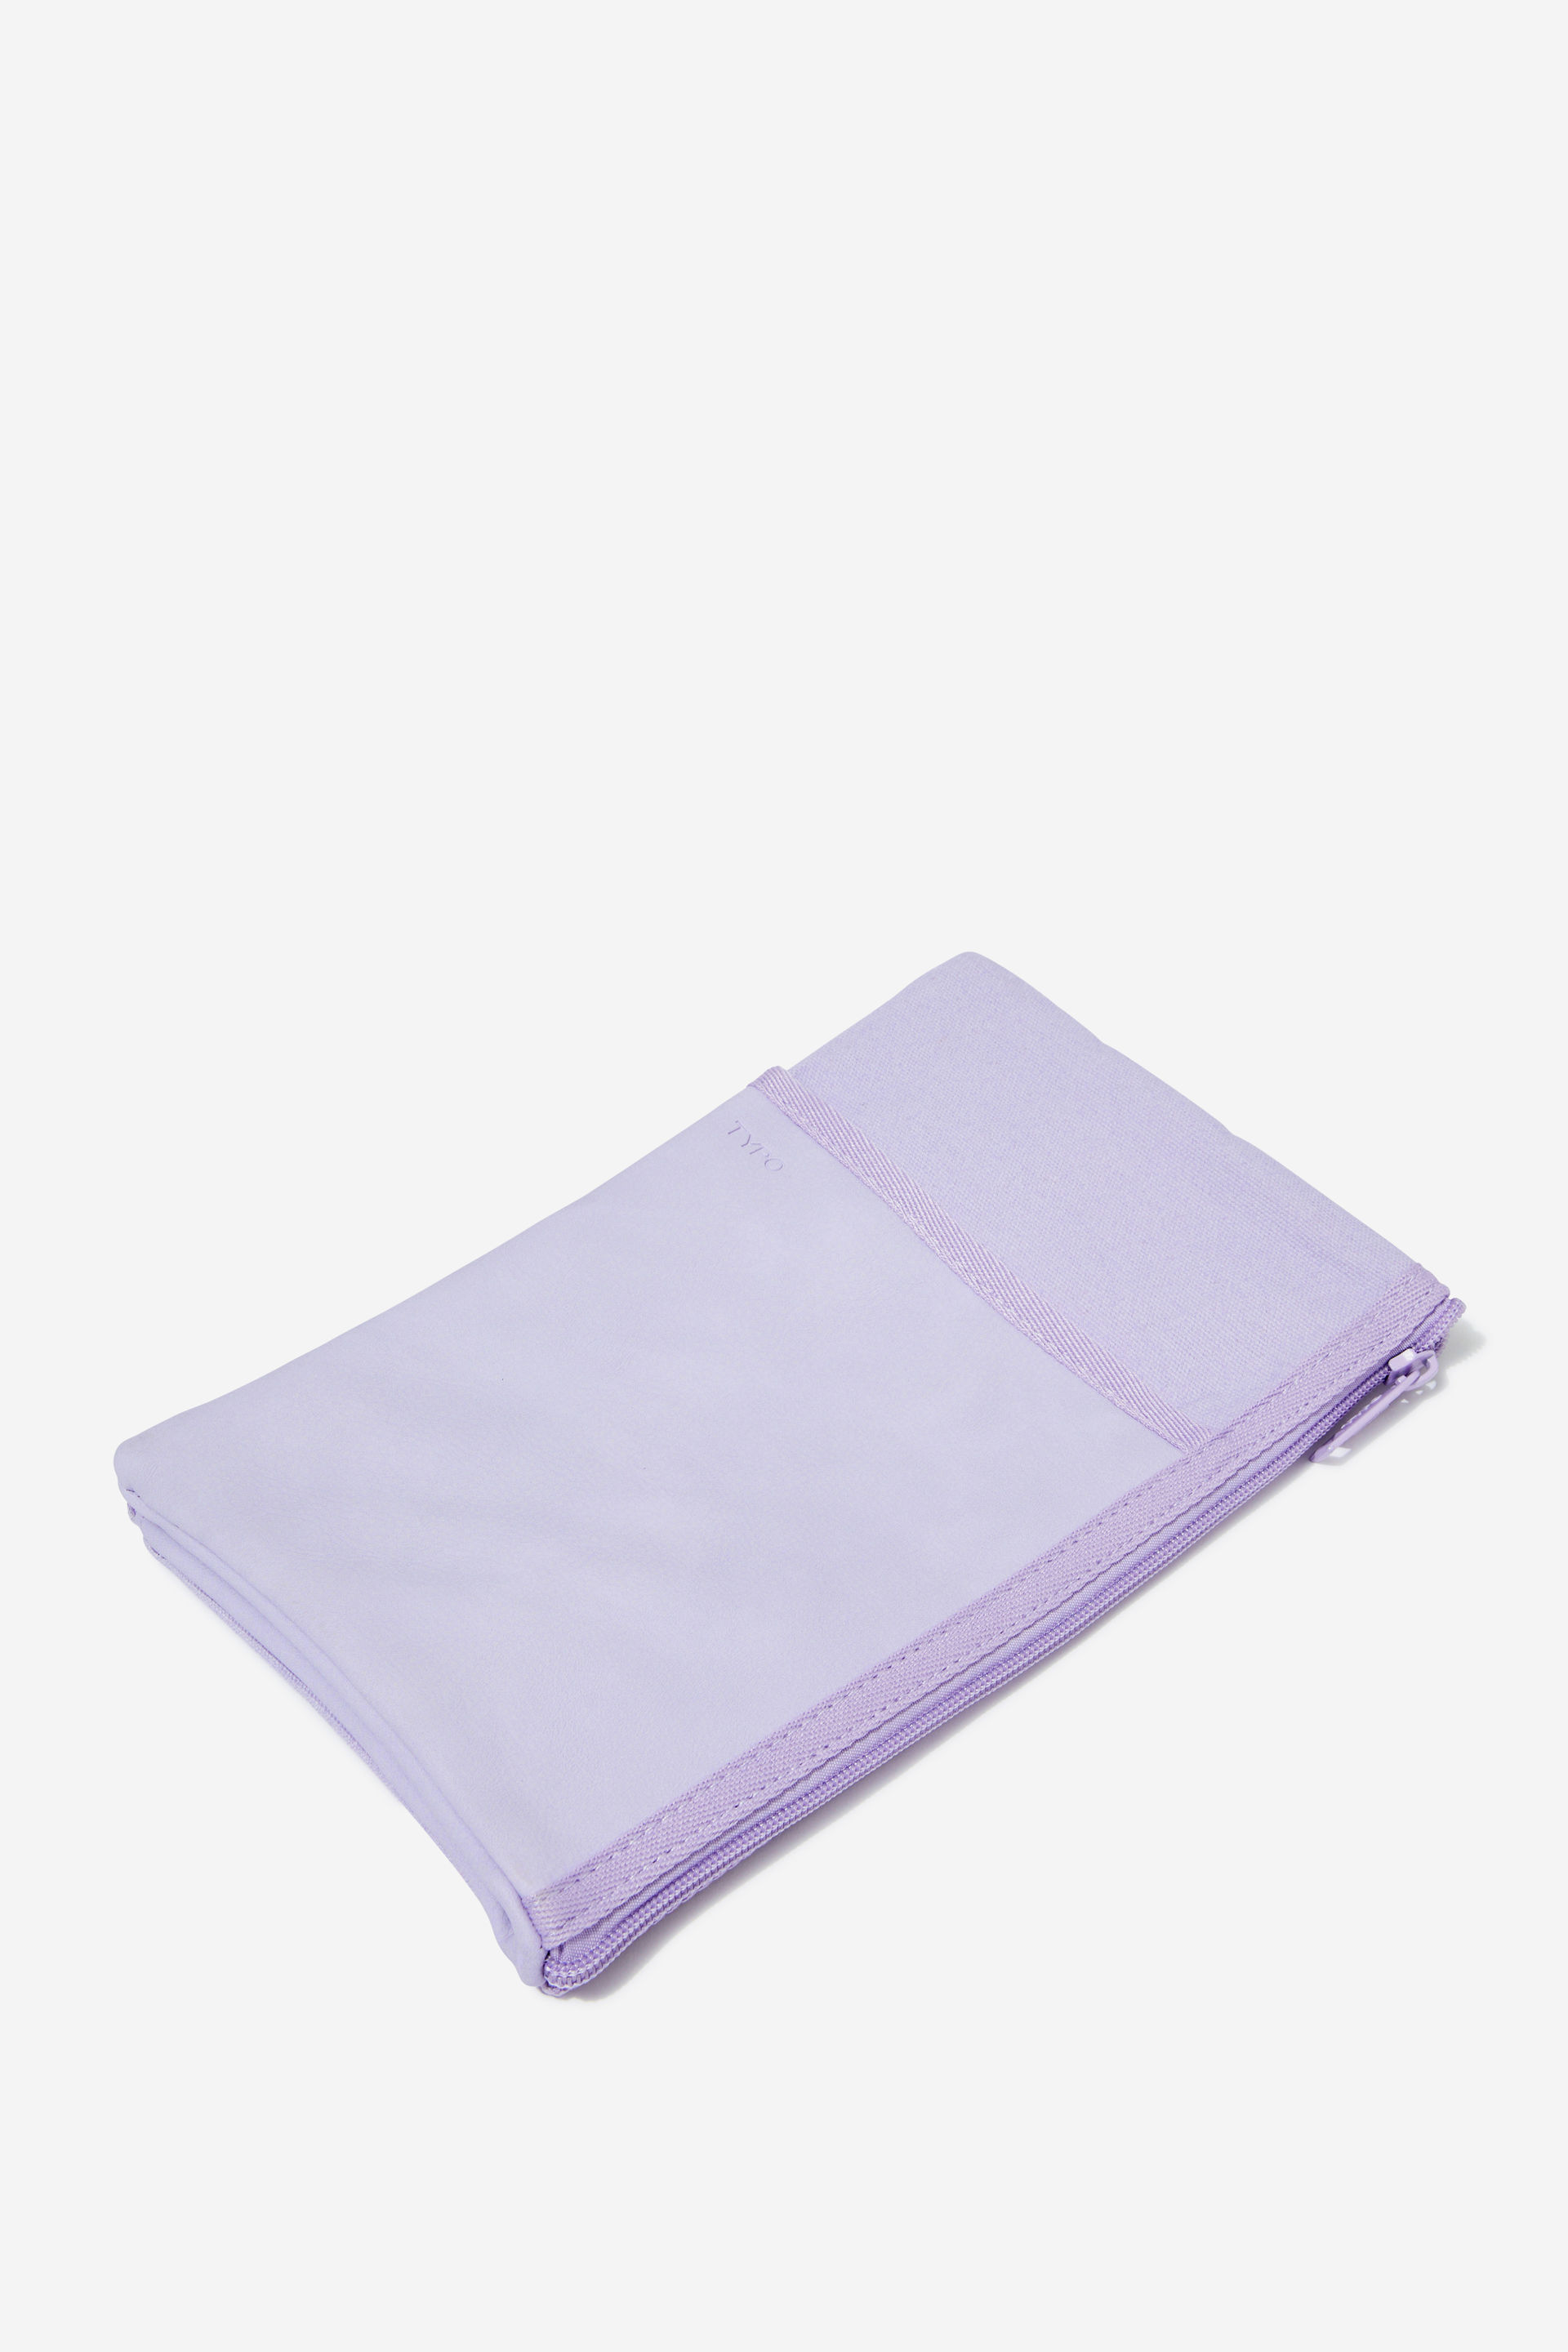 Typo - Everyday Compact Pencil Case - Soft lilac